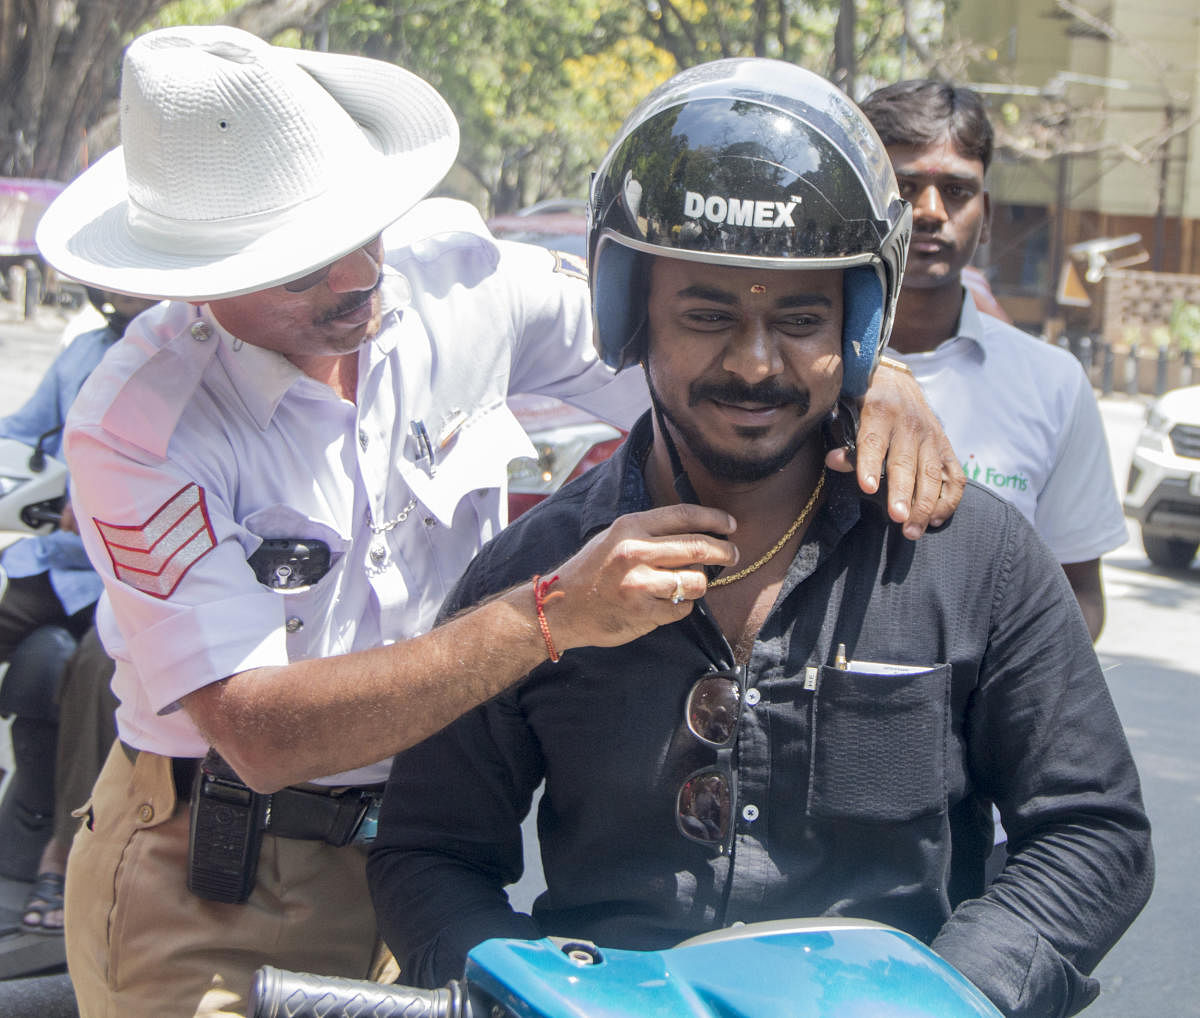 On the occasion of World Head Injury Day on 20th March, Fortis Hospitals in association with Bangalore Traffic Police distributed helmets to the people to raise awareness on the importance of using helmets while riding to ensure minimal damage in case of accidents. Photo by Prathiksha Mk